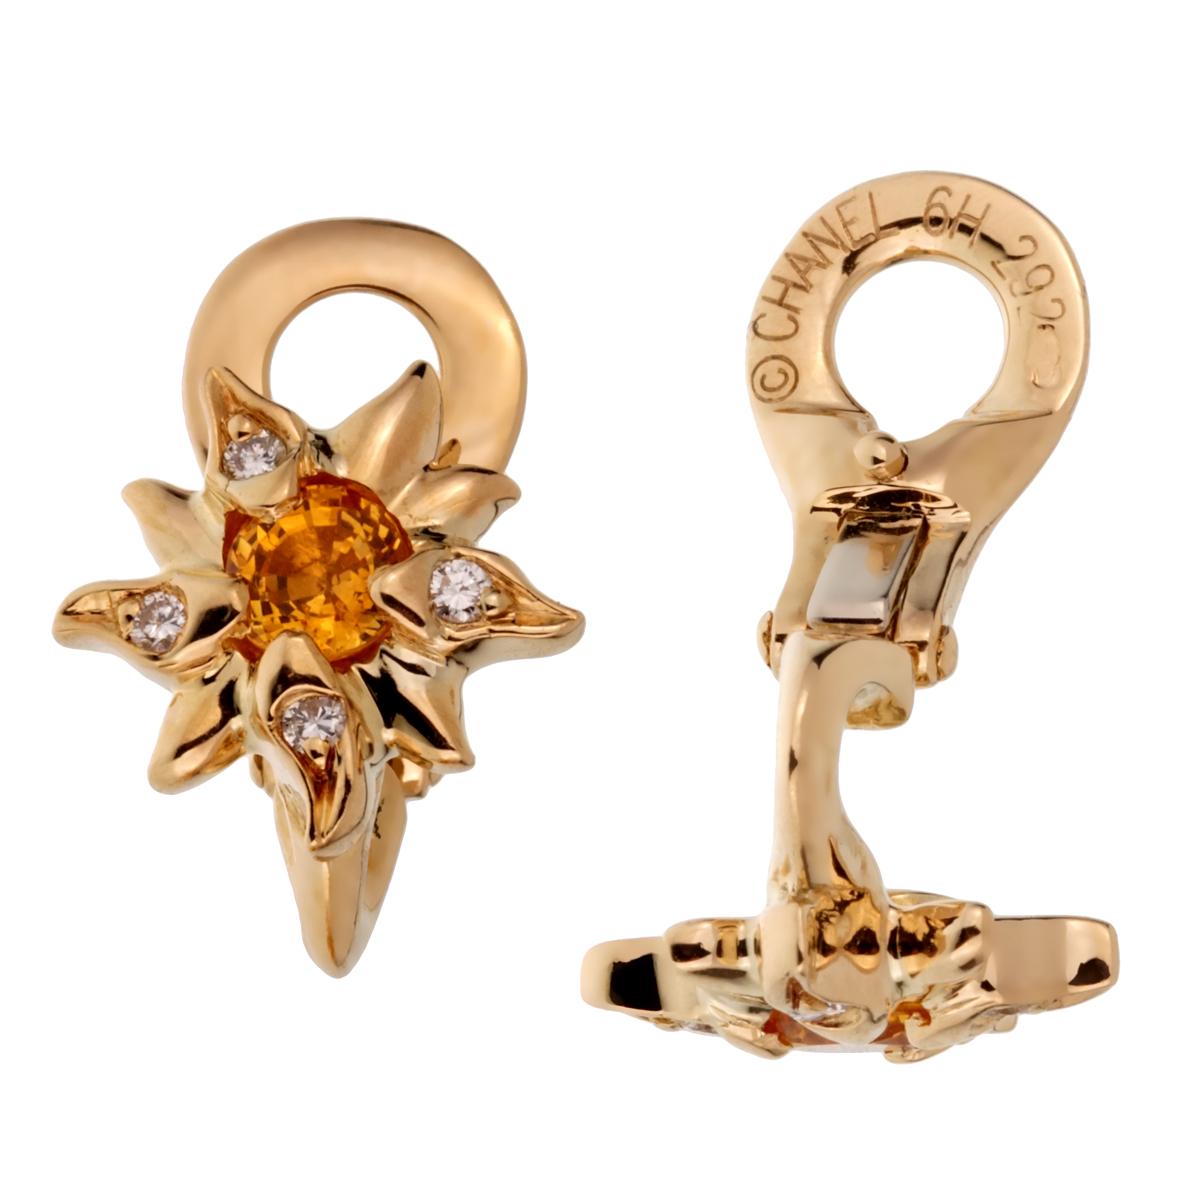 A chic set of Chanel Comete earrings featuring yellow sapphires and round brilliant cut diamonds in 18k yellow gold.

Earring Width: .49